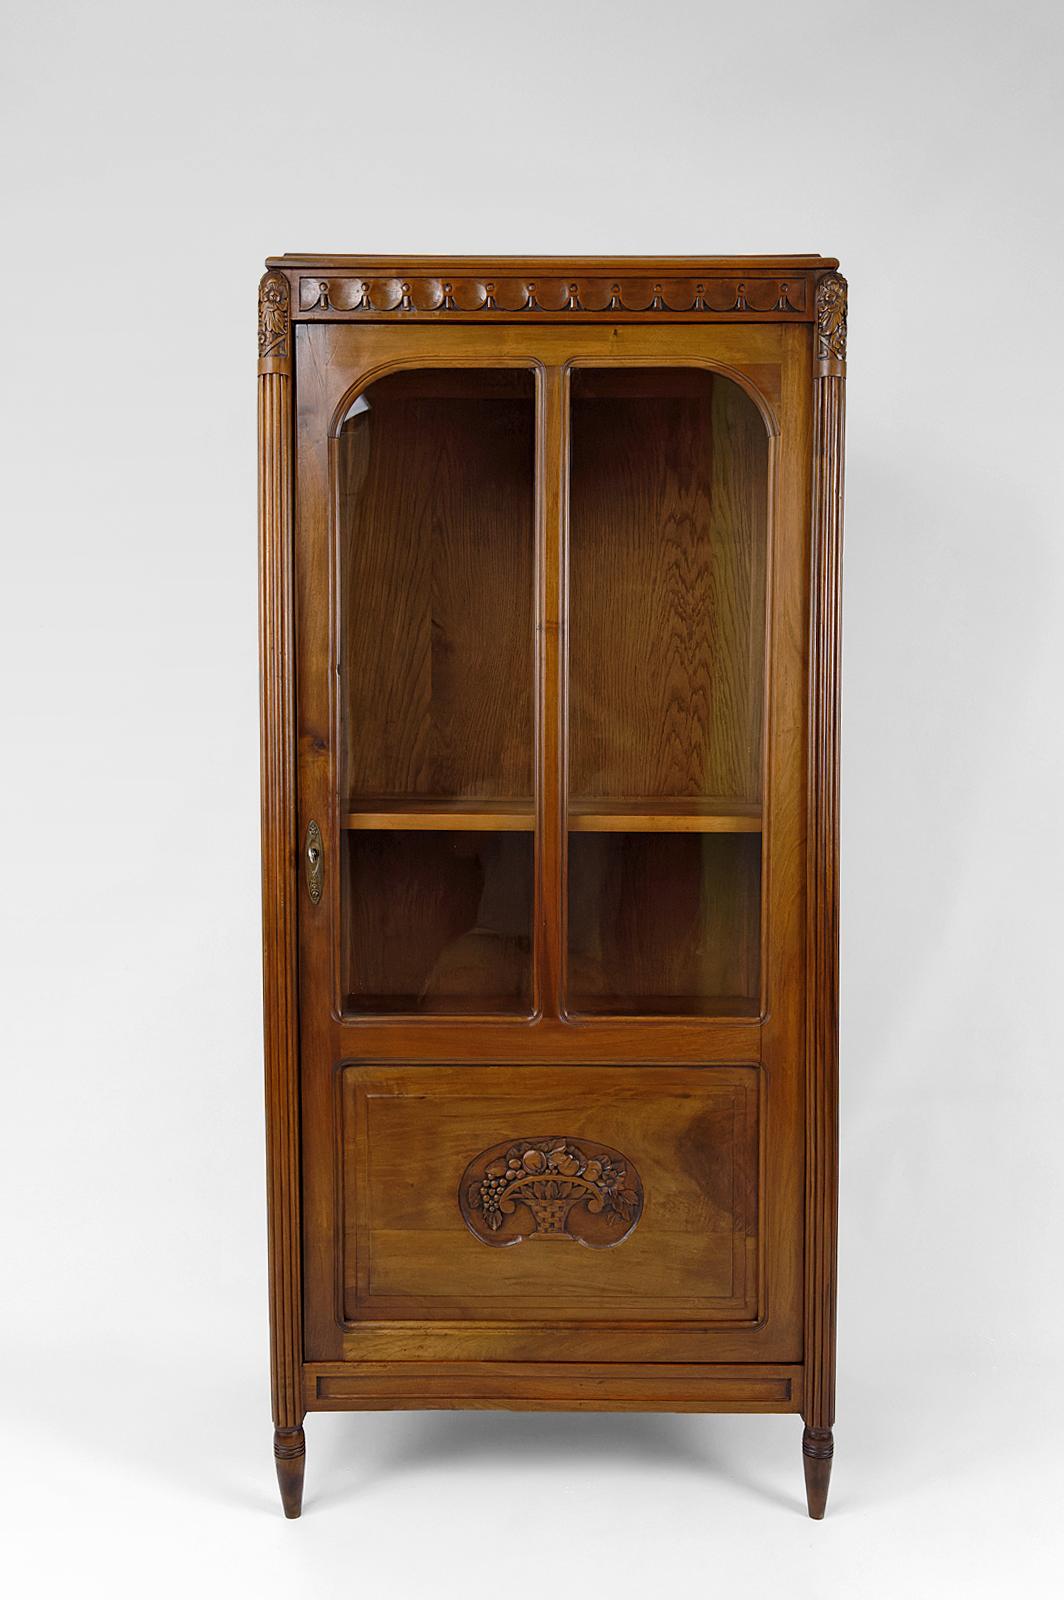 Cabinet / display case / bookcase with glass door, in walnut.

In the style of the productions of Follot, Dufrène.
Art Deco.
France, Circa 1920.

Carved fruit baskets on the door.
Pretty bronzes.
Fluted/tapered colonnades.

2 shelves.

Key + lock